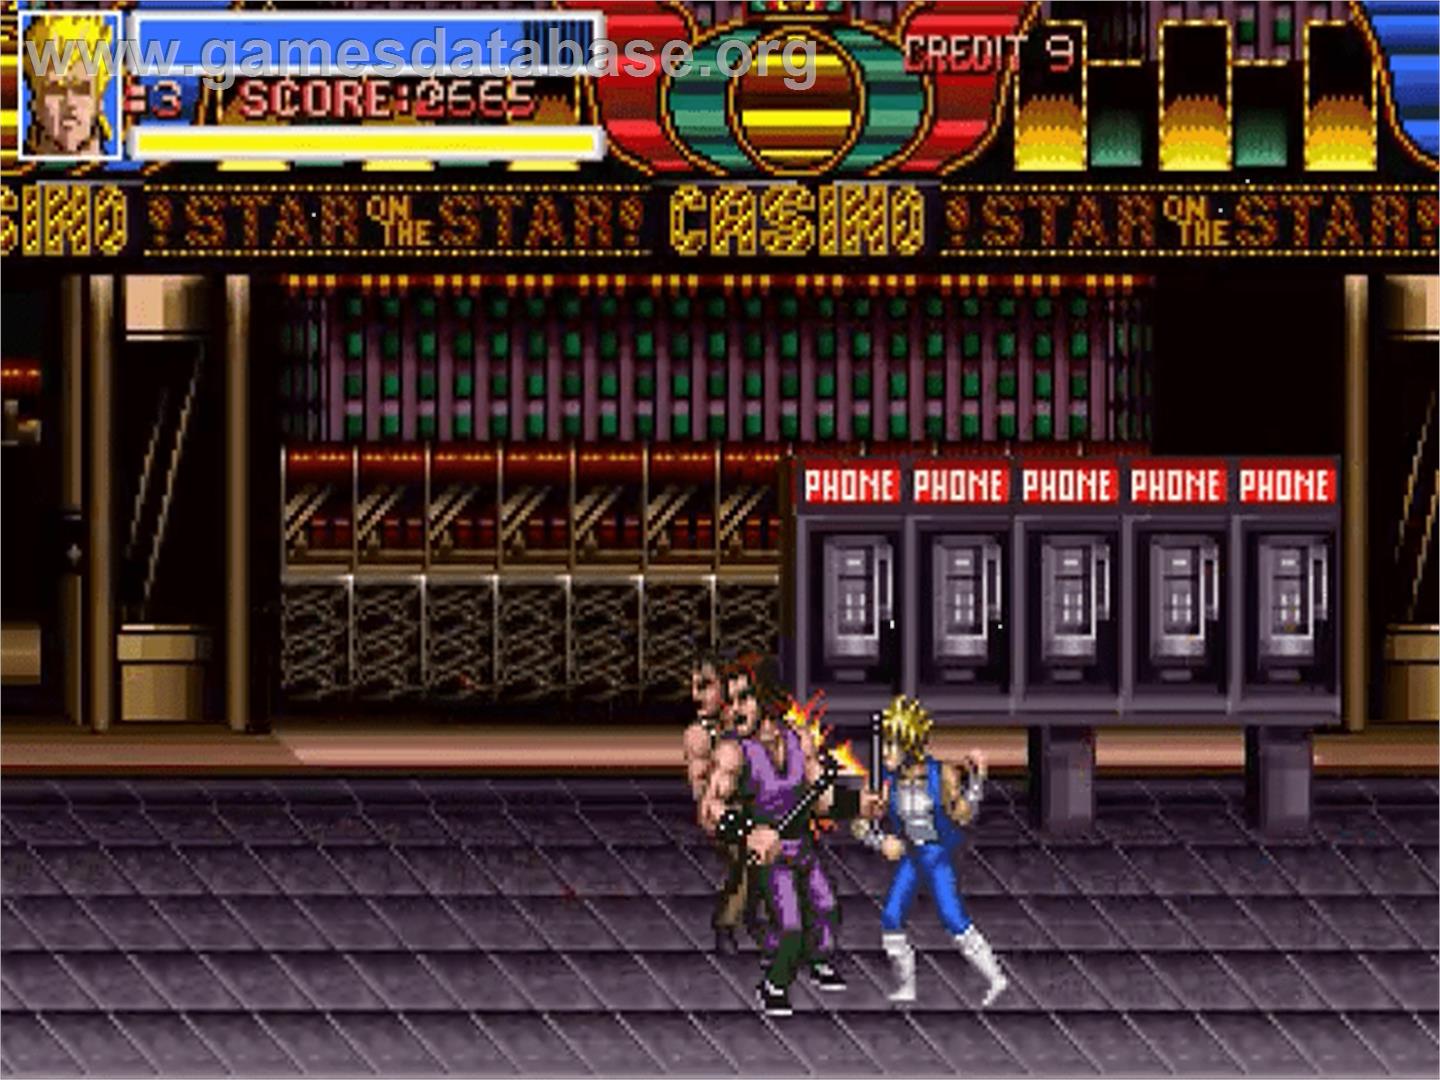 Return of the Double Dragon - OpenBOR - Artwork - In Game